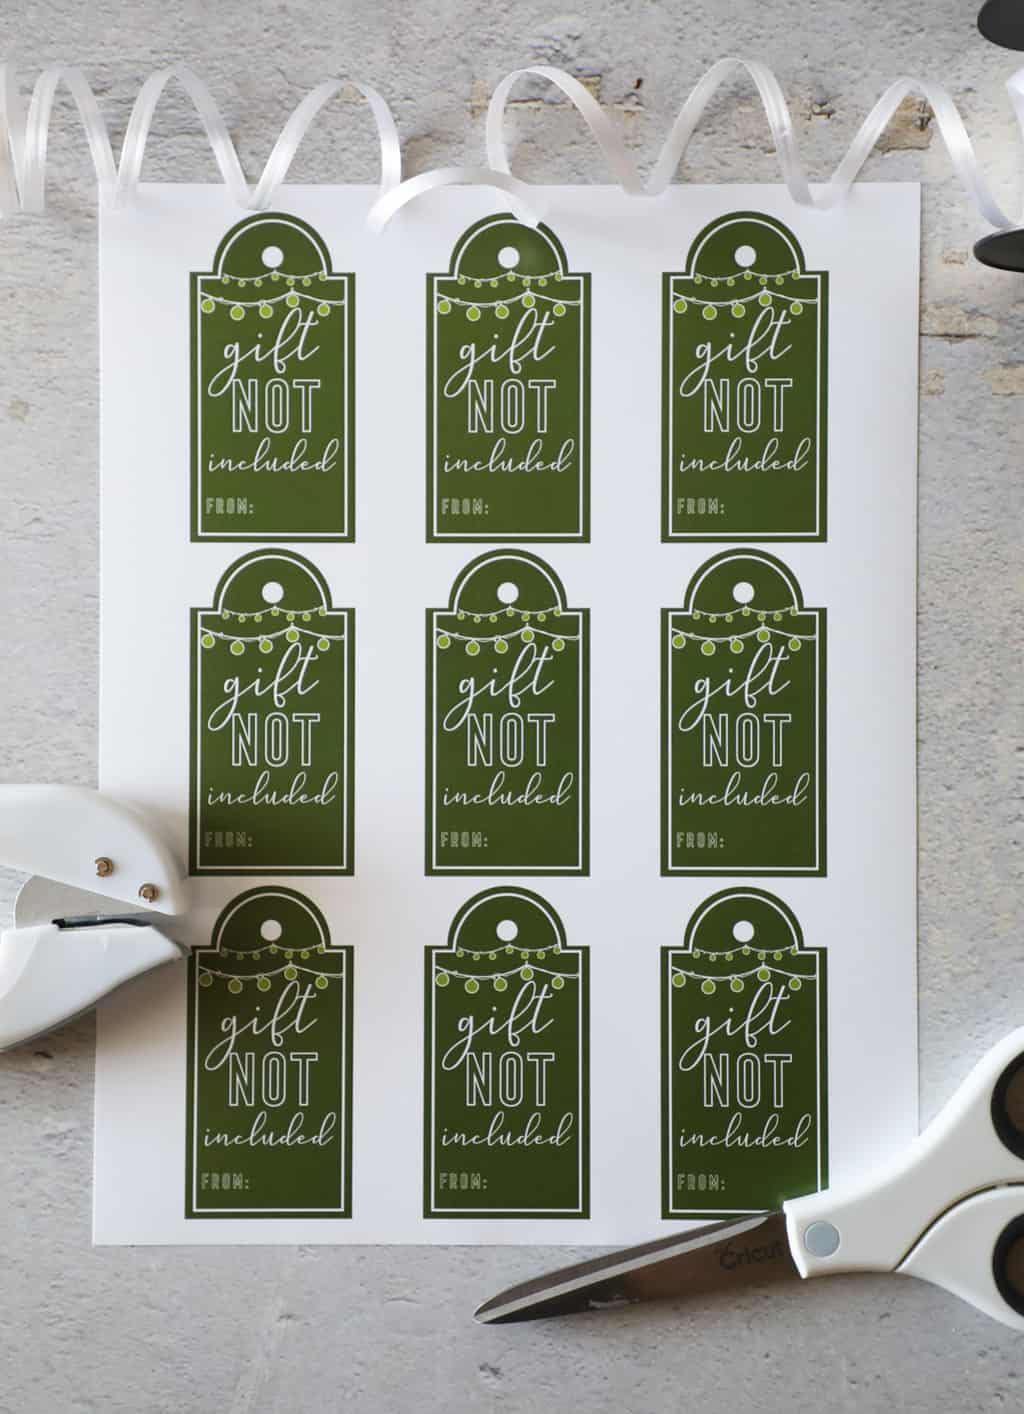 free printable gift tags next to scissors, ribbon and a hole punch